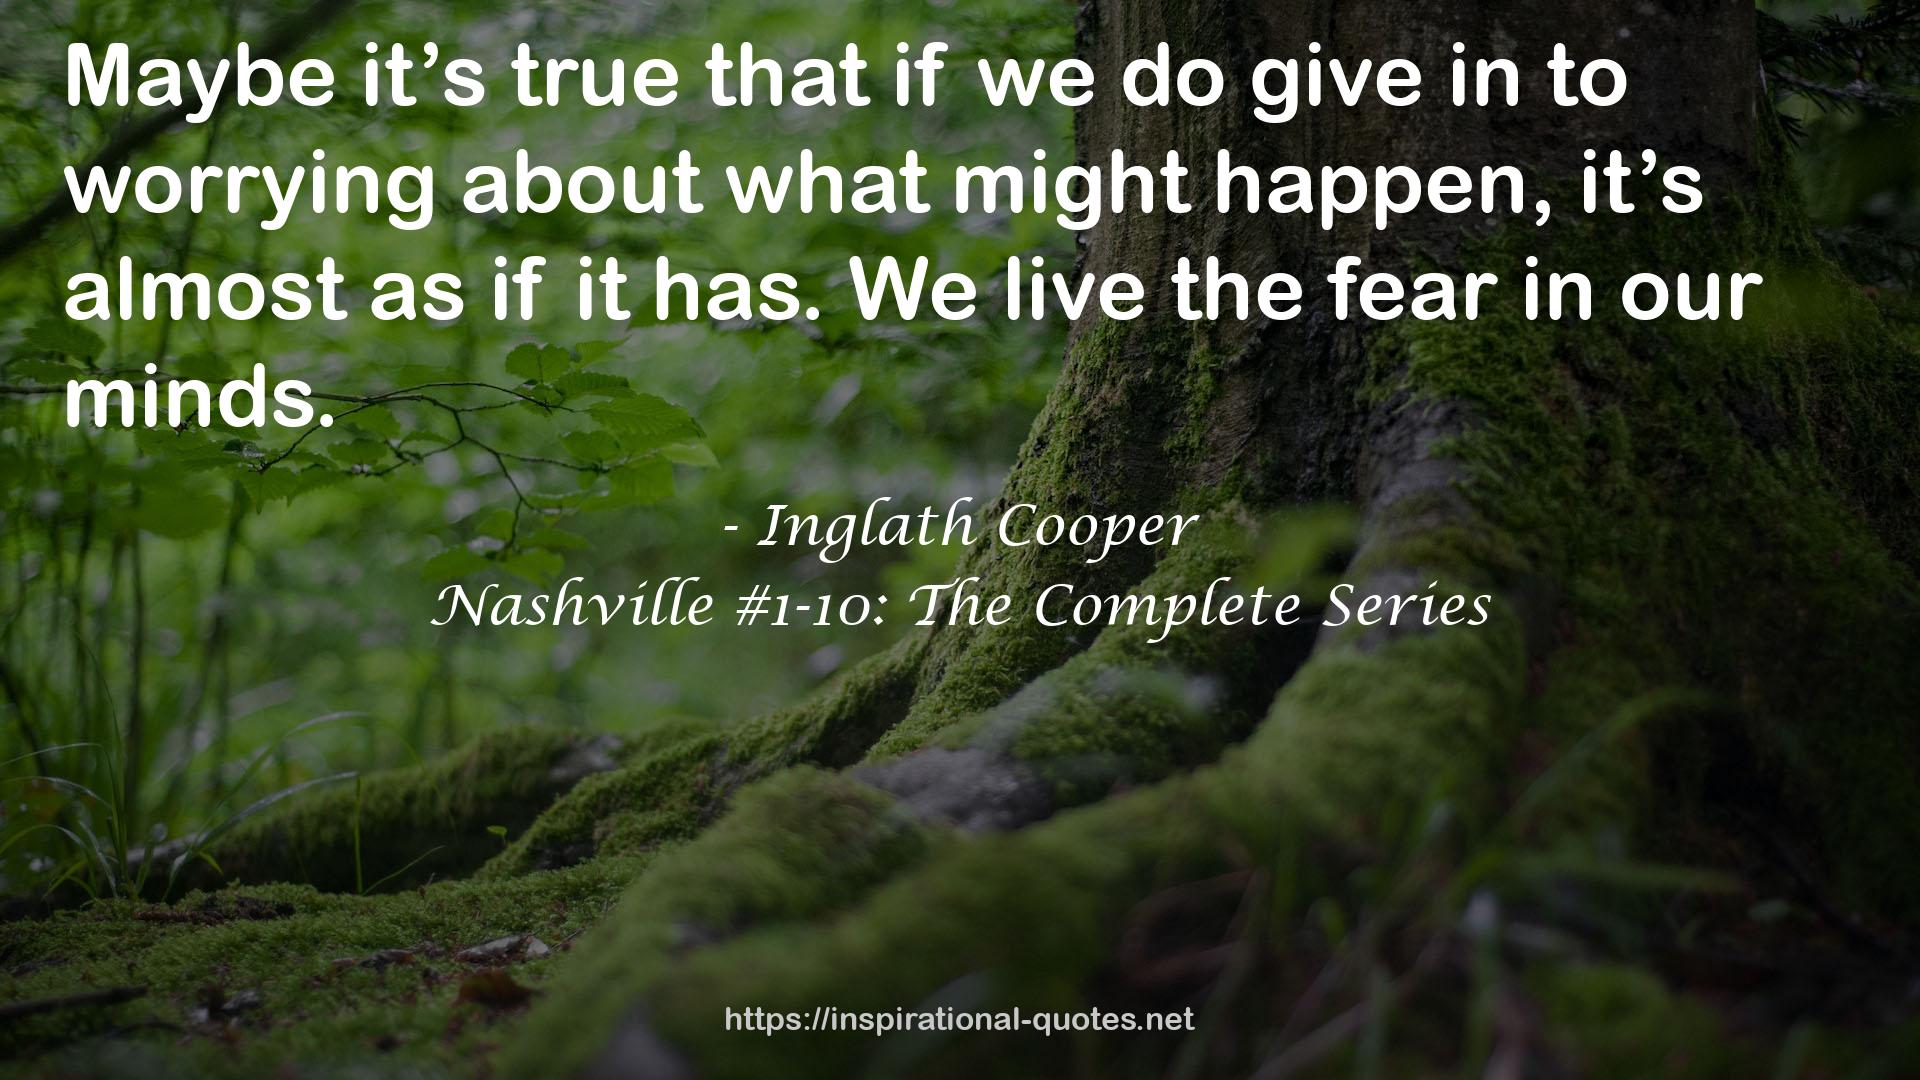 Nashville #1-10: The Complete Series QUOTES